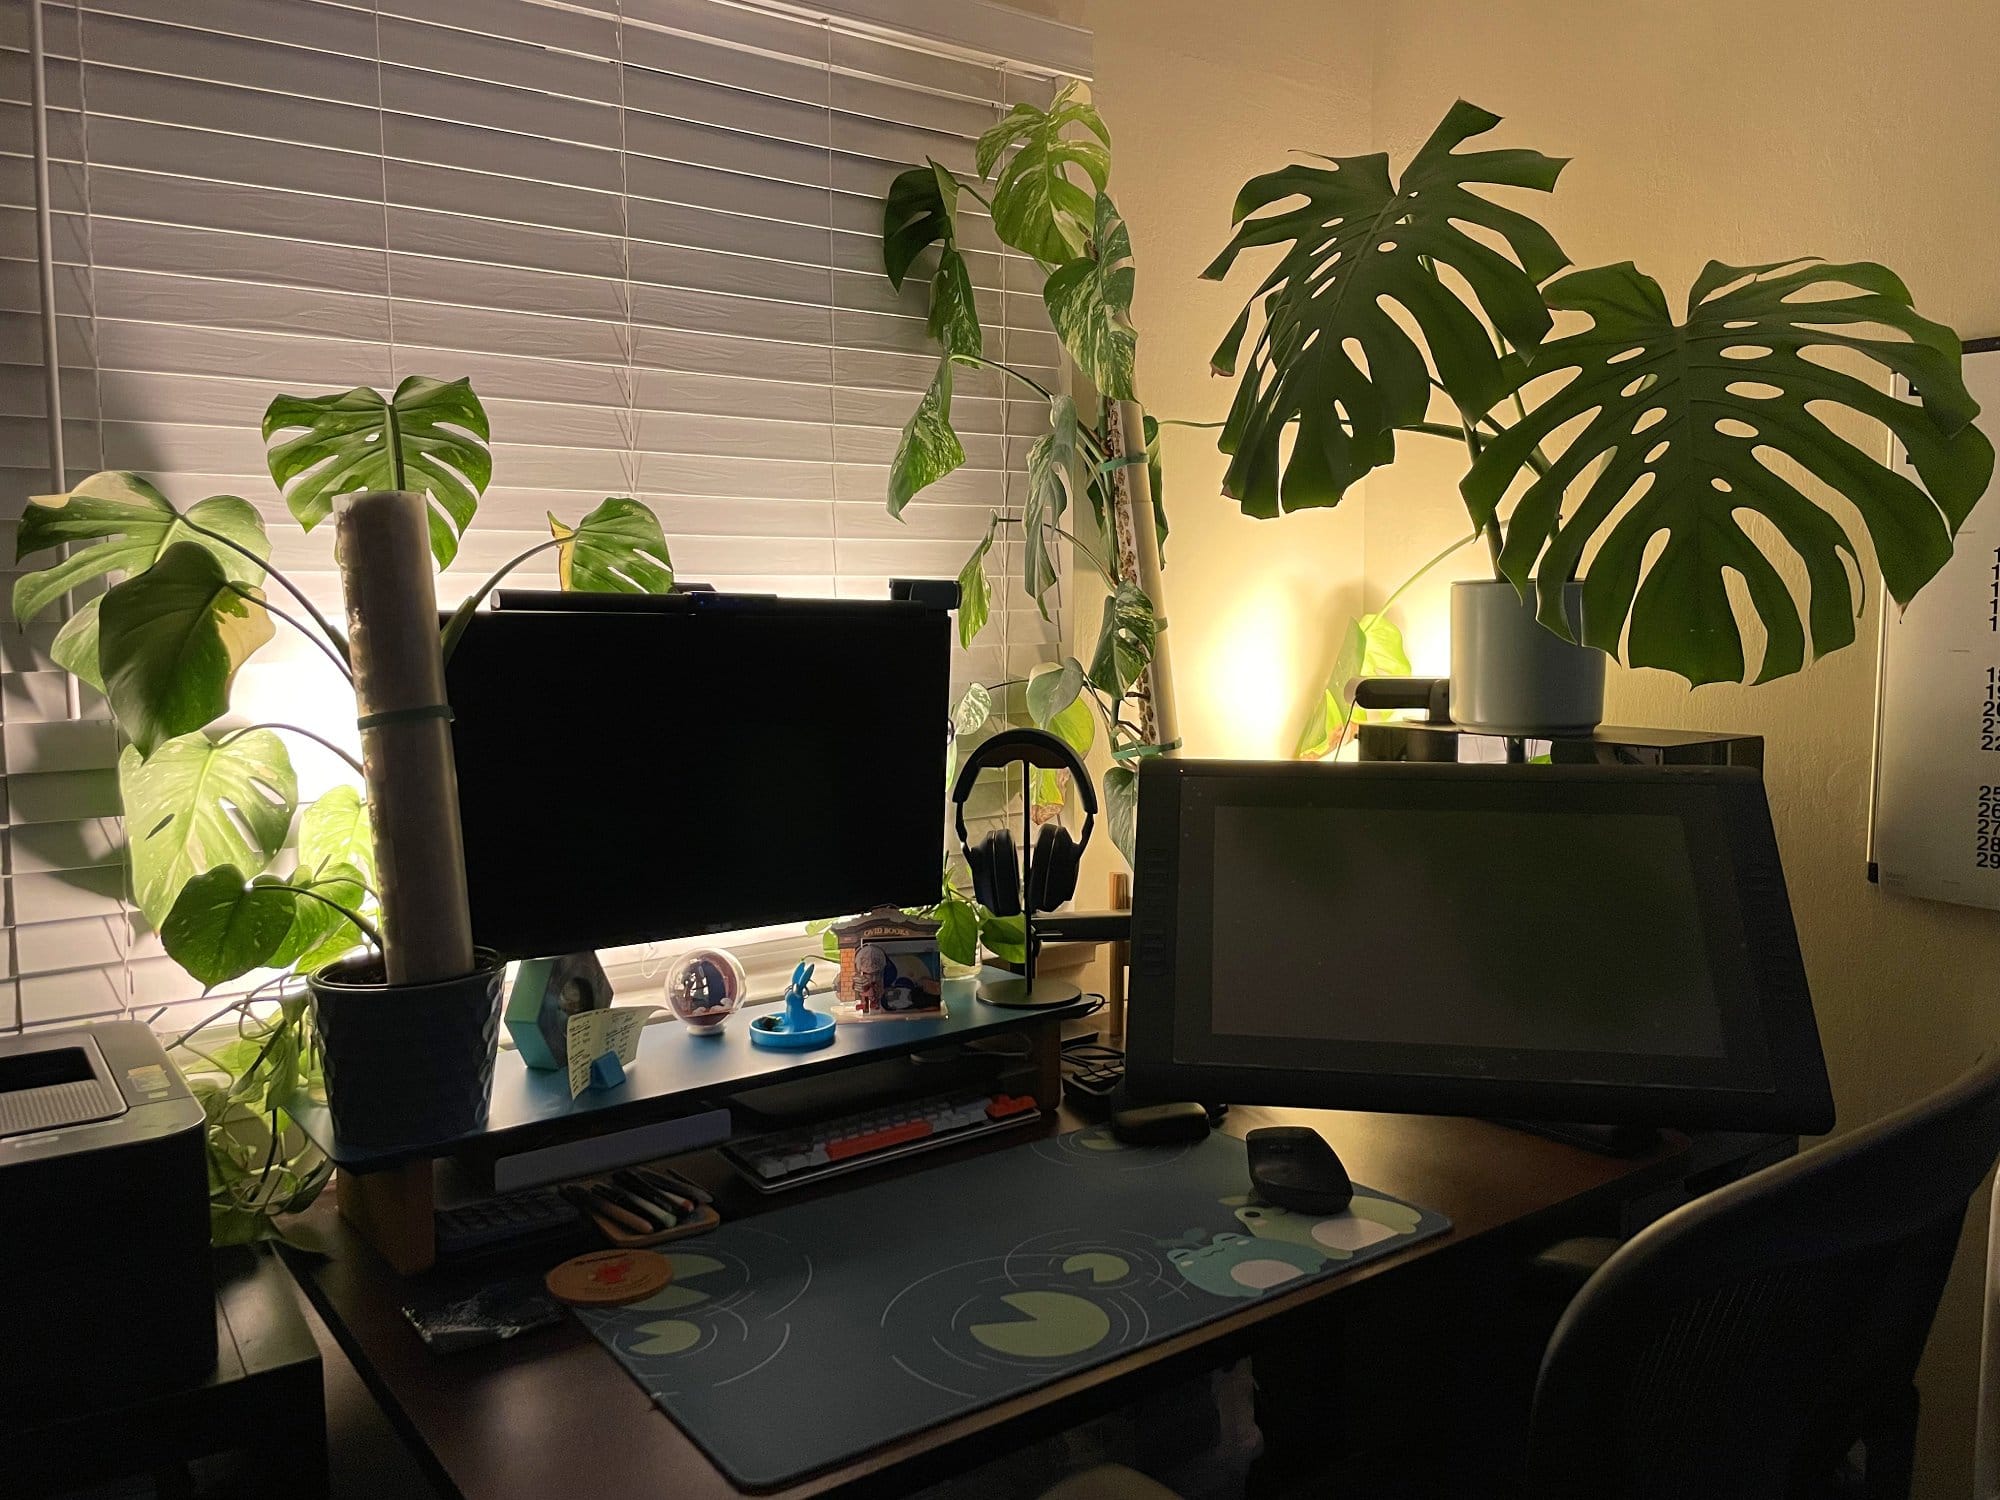 A cosy home office at night, with the warm glow of a lamp highlighting houseplants and a desk setup with a monitor and graphic tablet